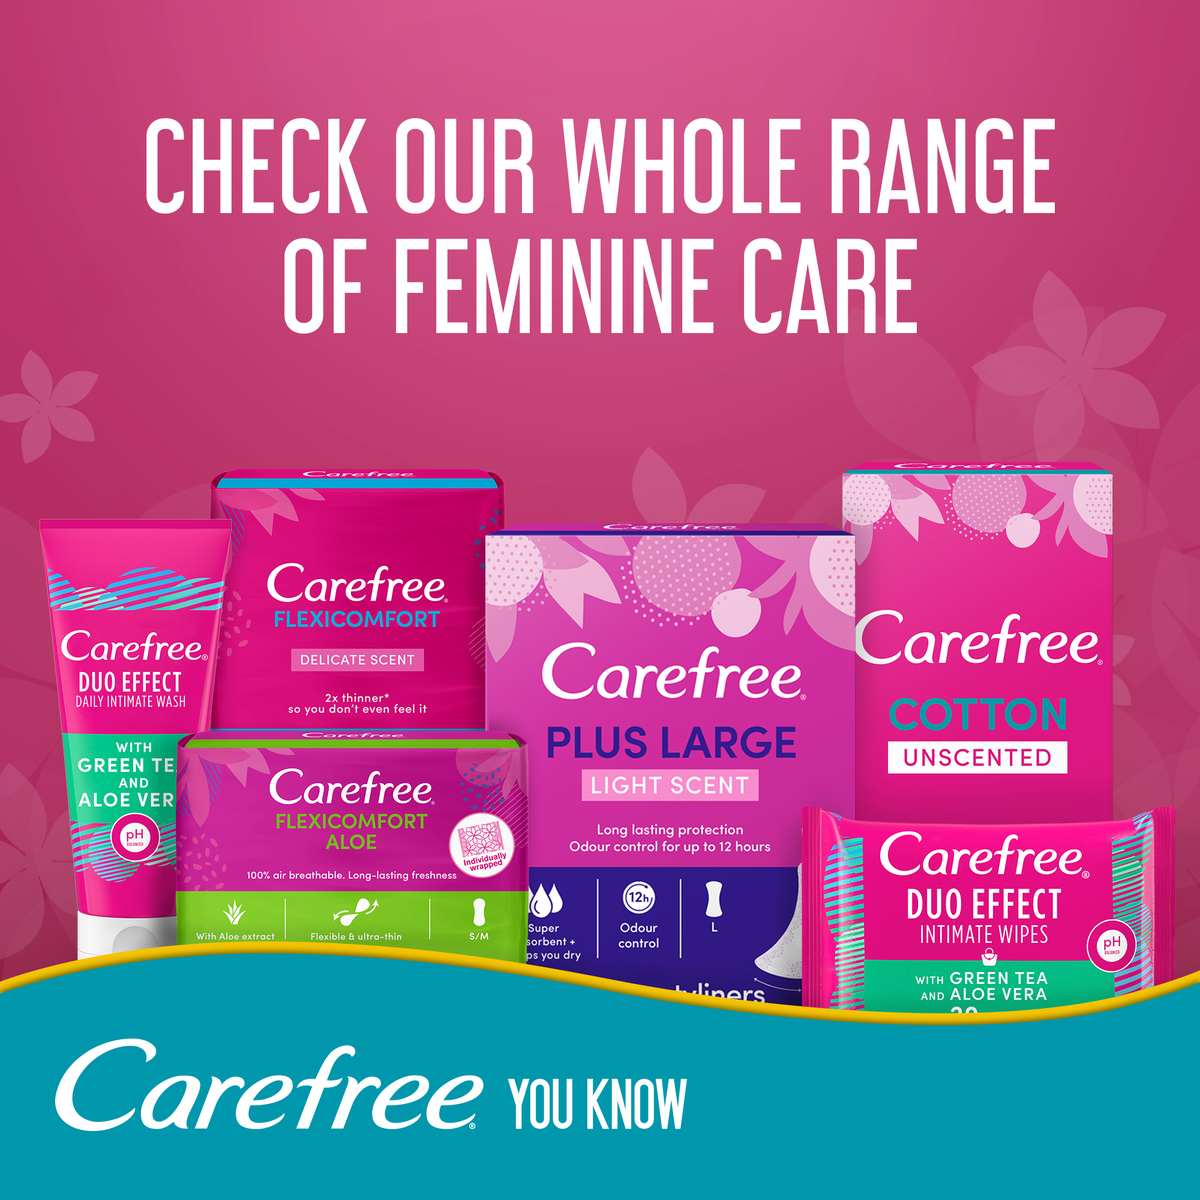 Carefree Panty Liners Plus Large Fresh Scent 20pcs